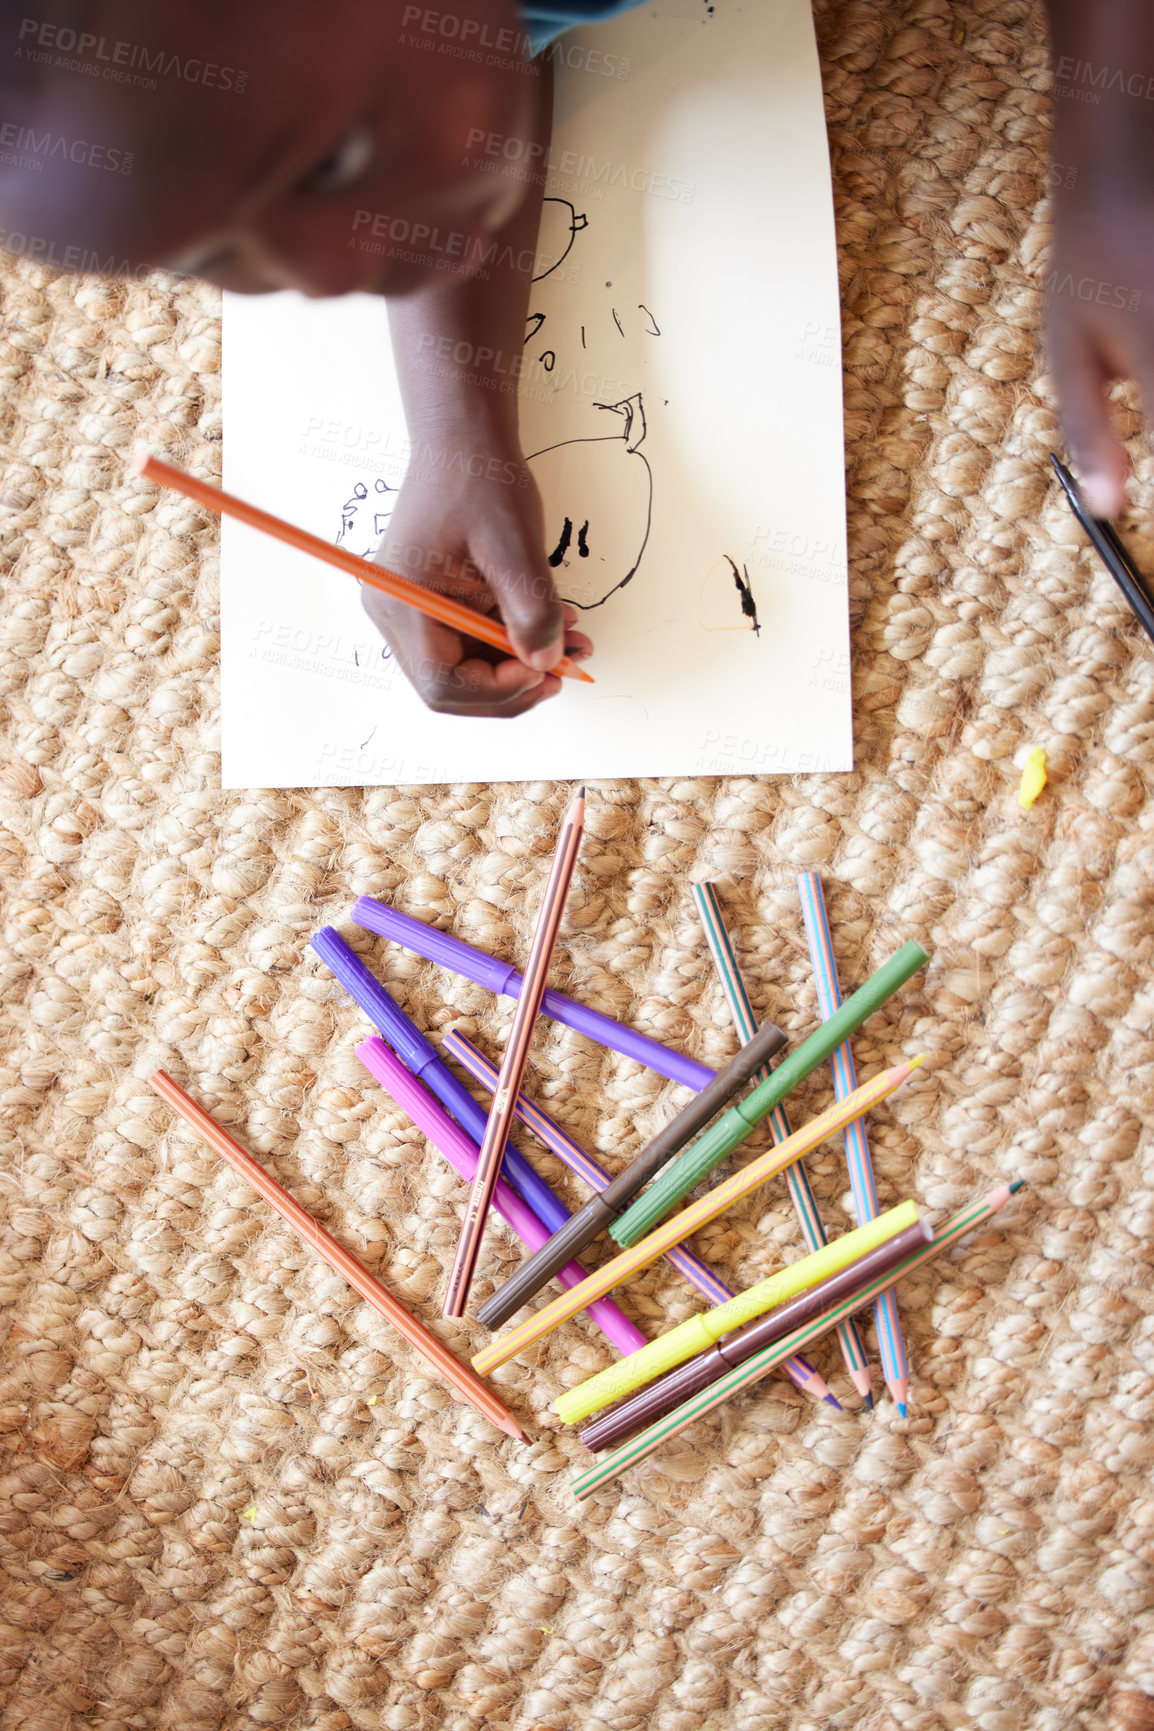 Buy stock photo Shot of a young boy sitting on the floor drawing pictures